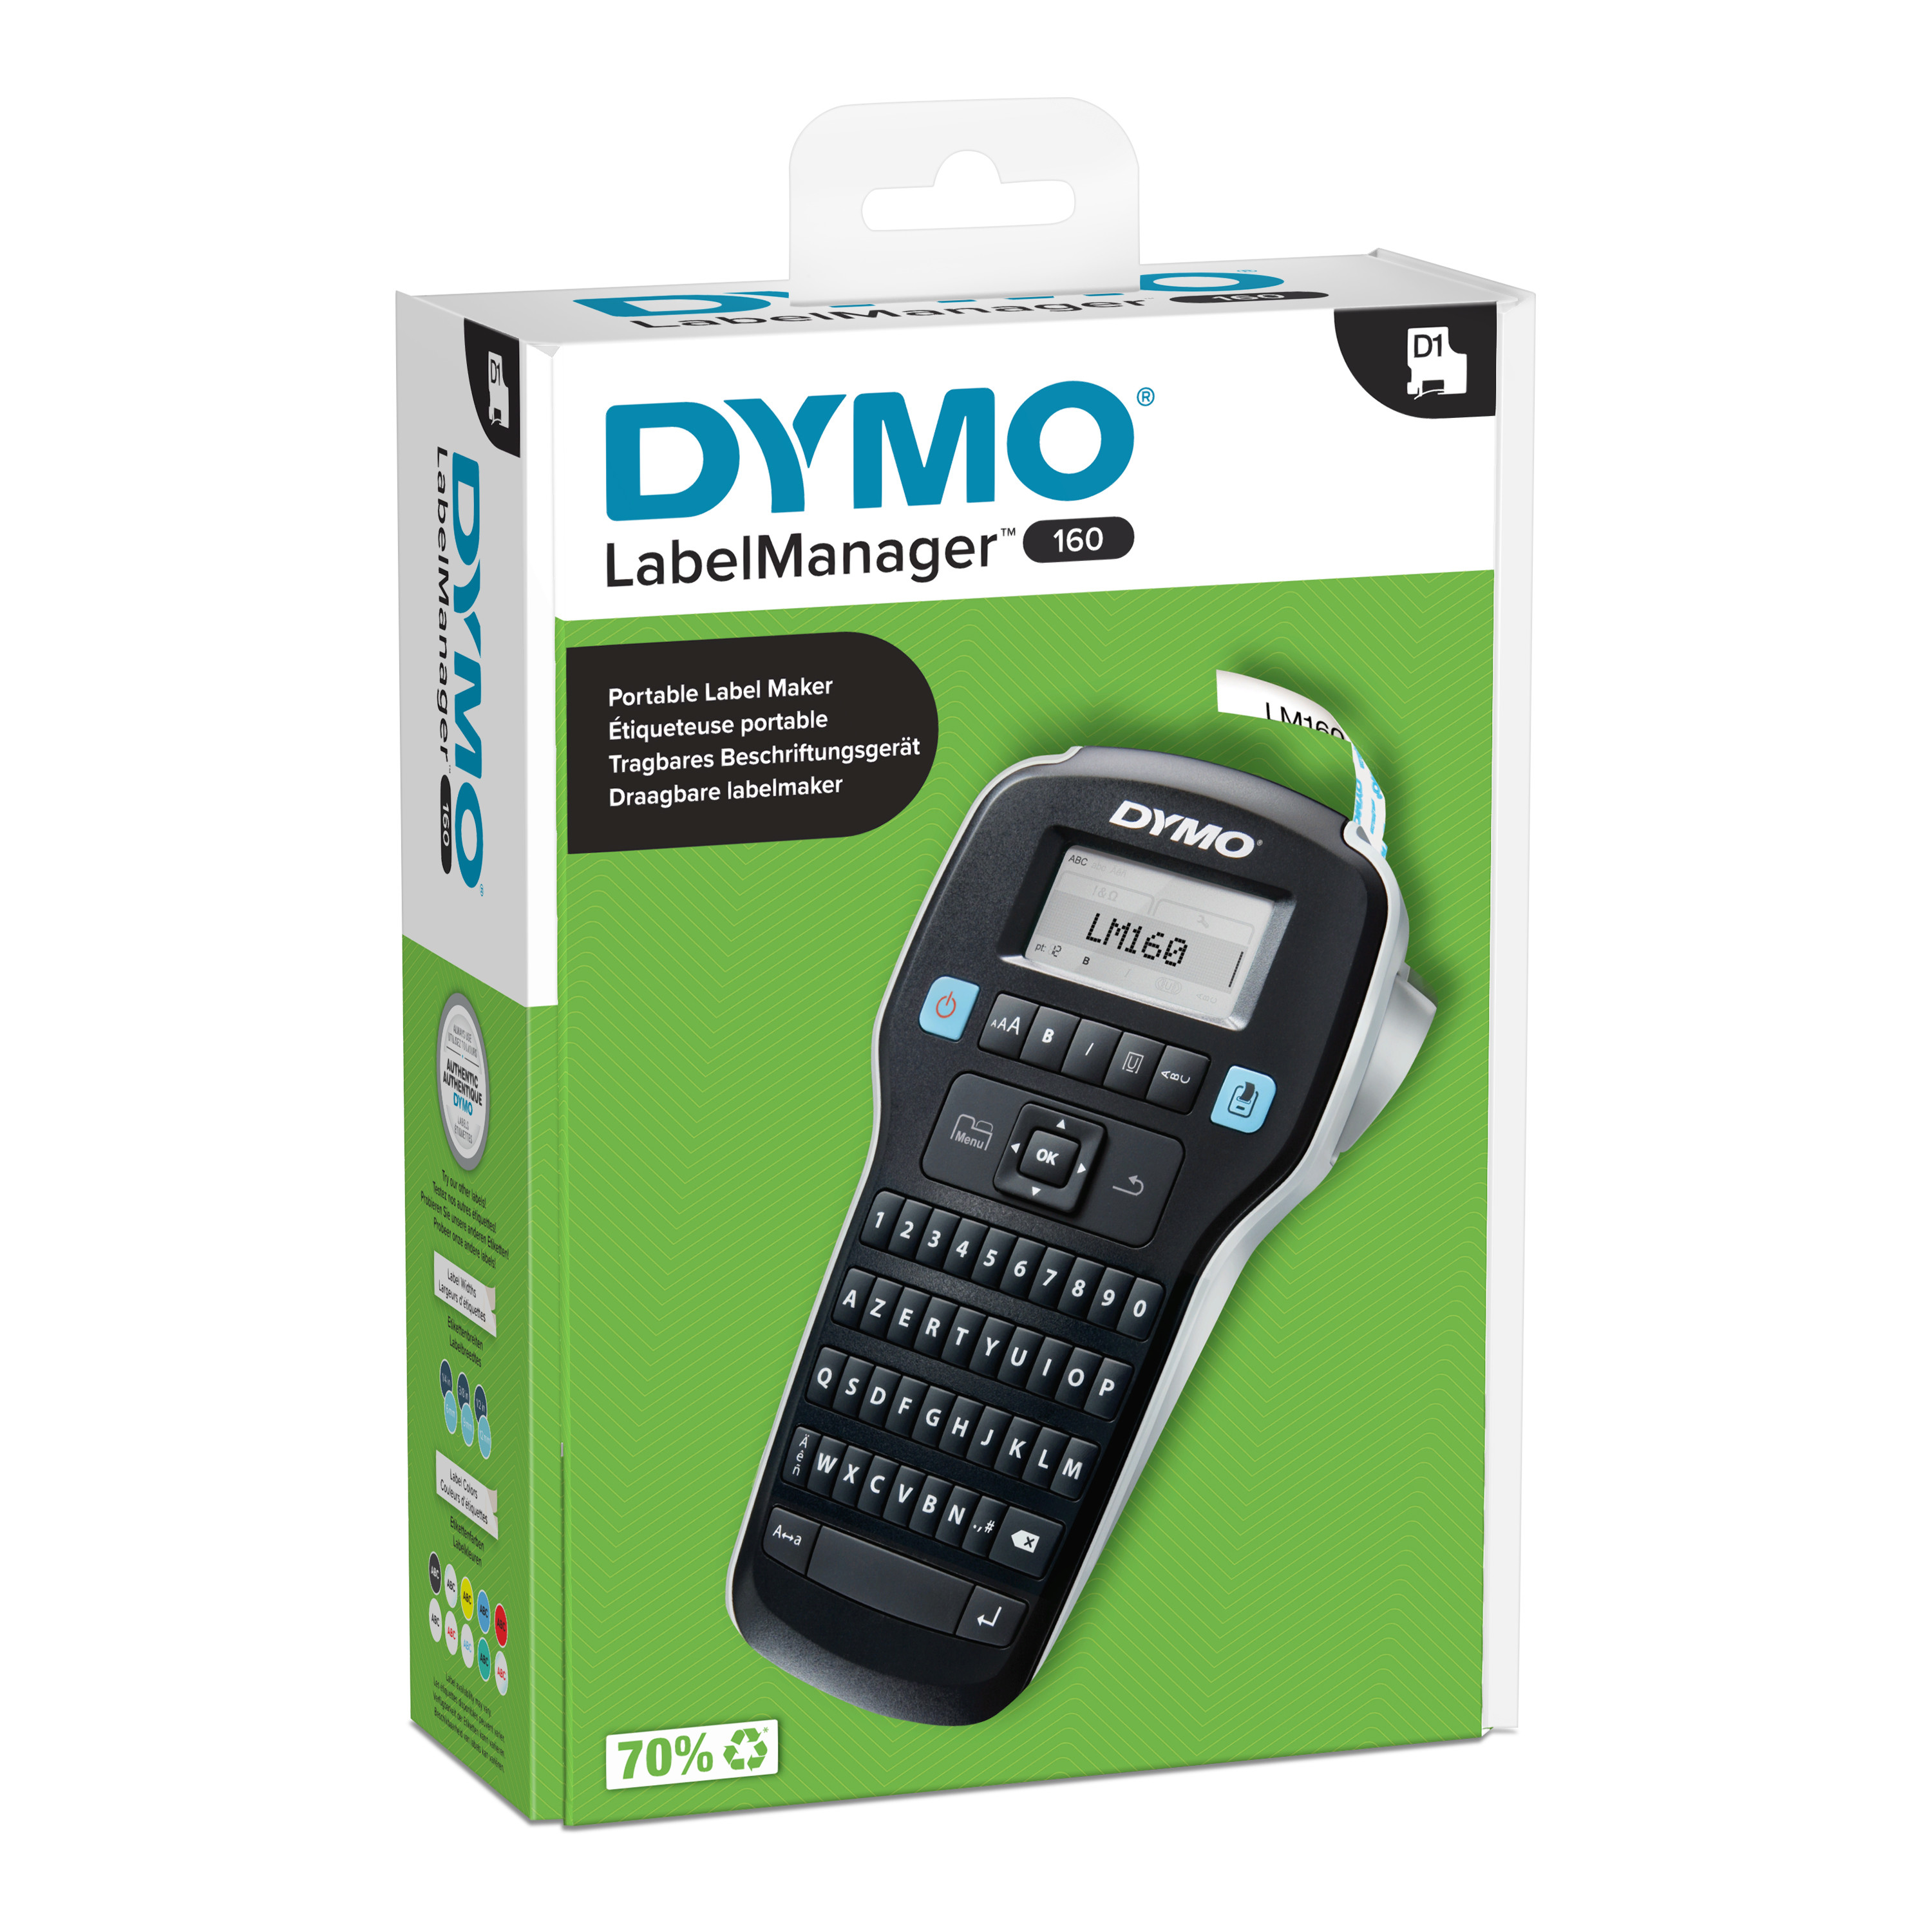 DYMO LabelManager 160 6/9/12 mm D1-Bänder Azerty - 2174450